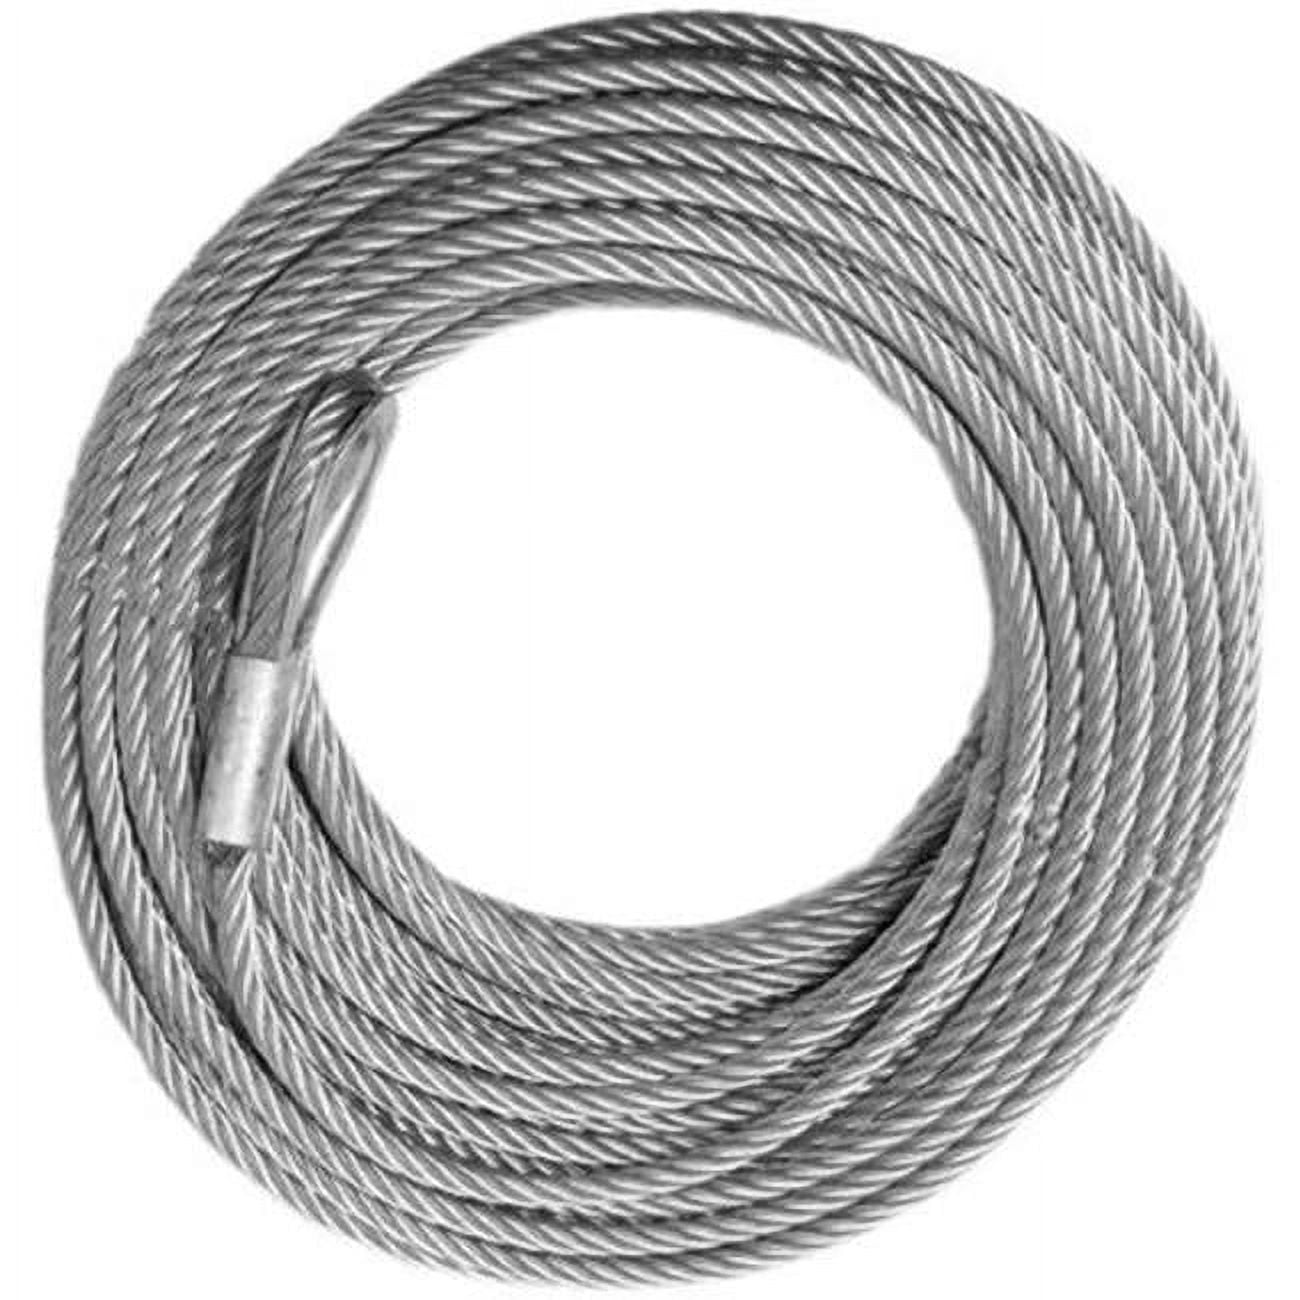 Wrecker Replacement Cable - 7/16 X 125 Galvanized (17 600lb Strength) (vehicle Recovery)